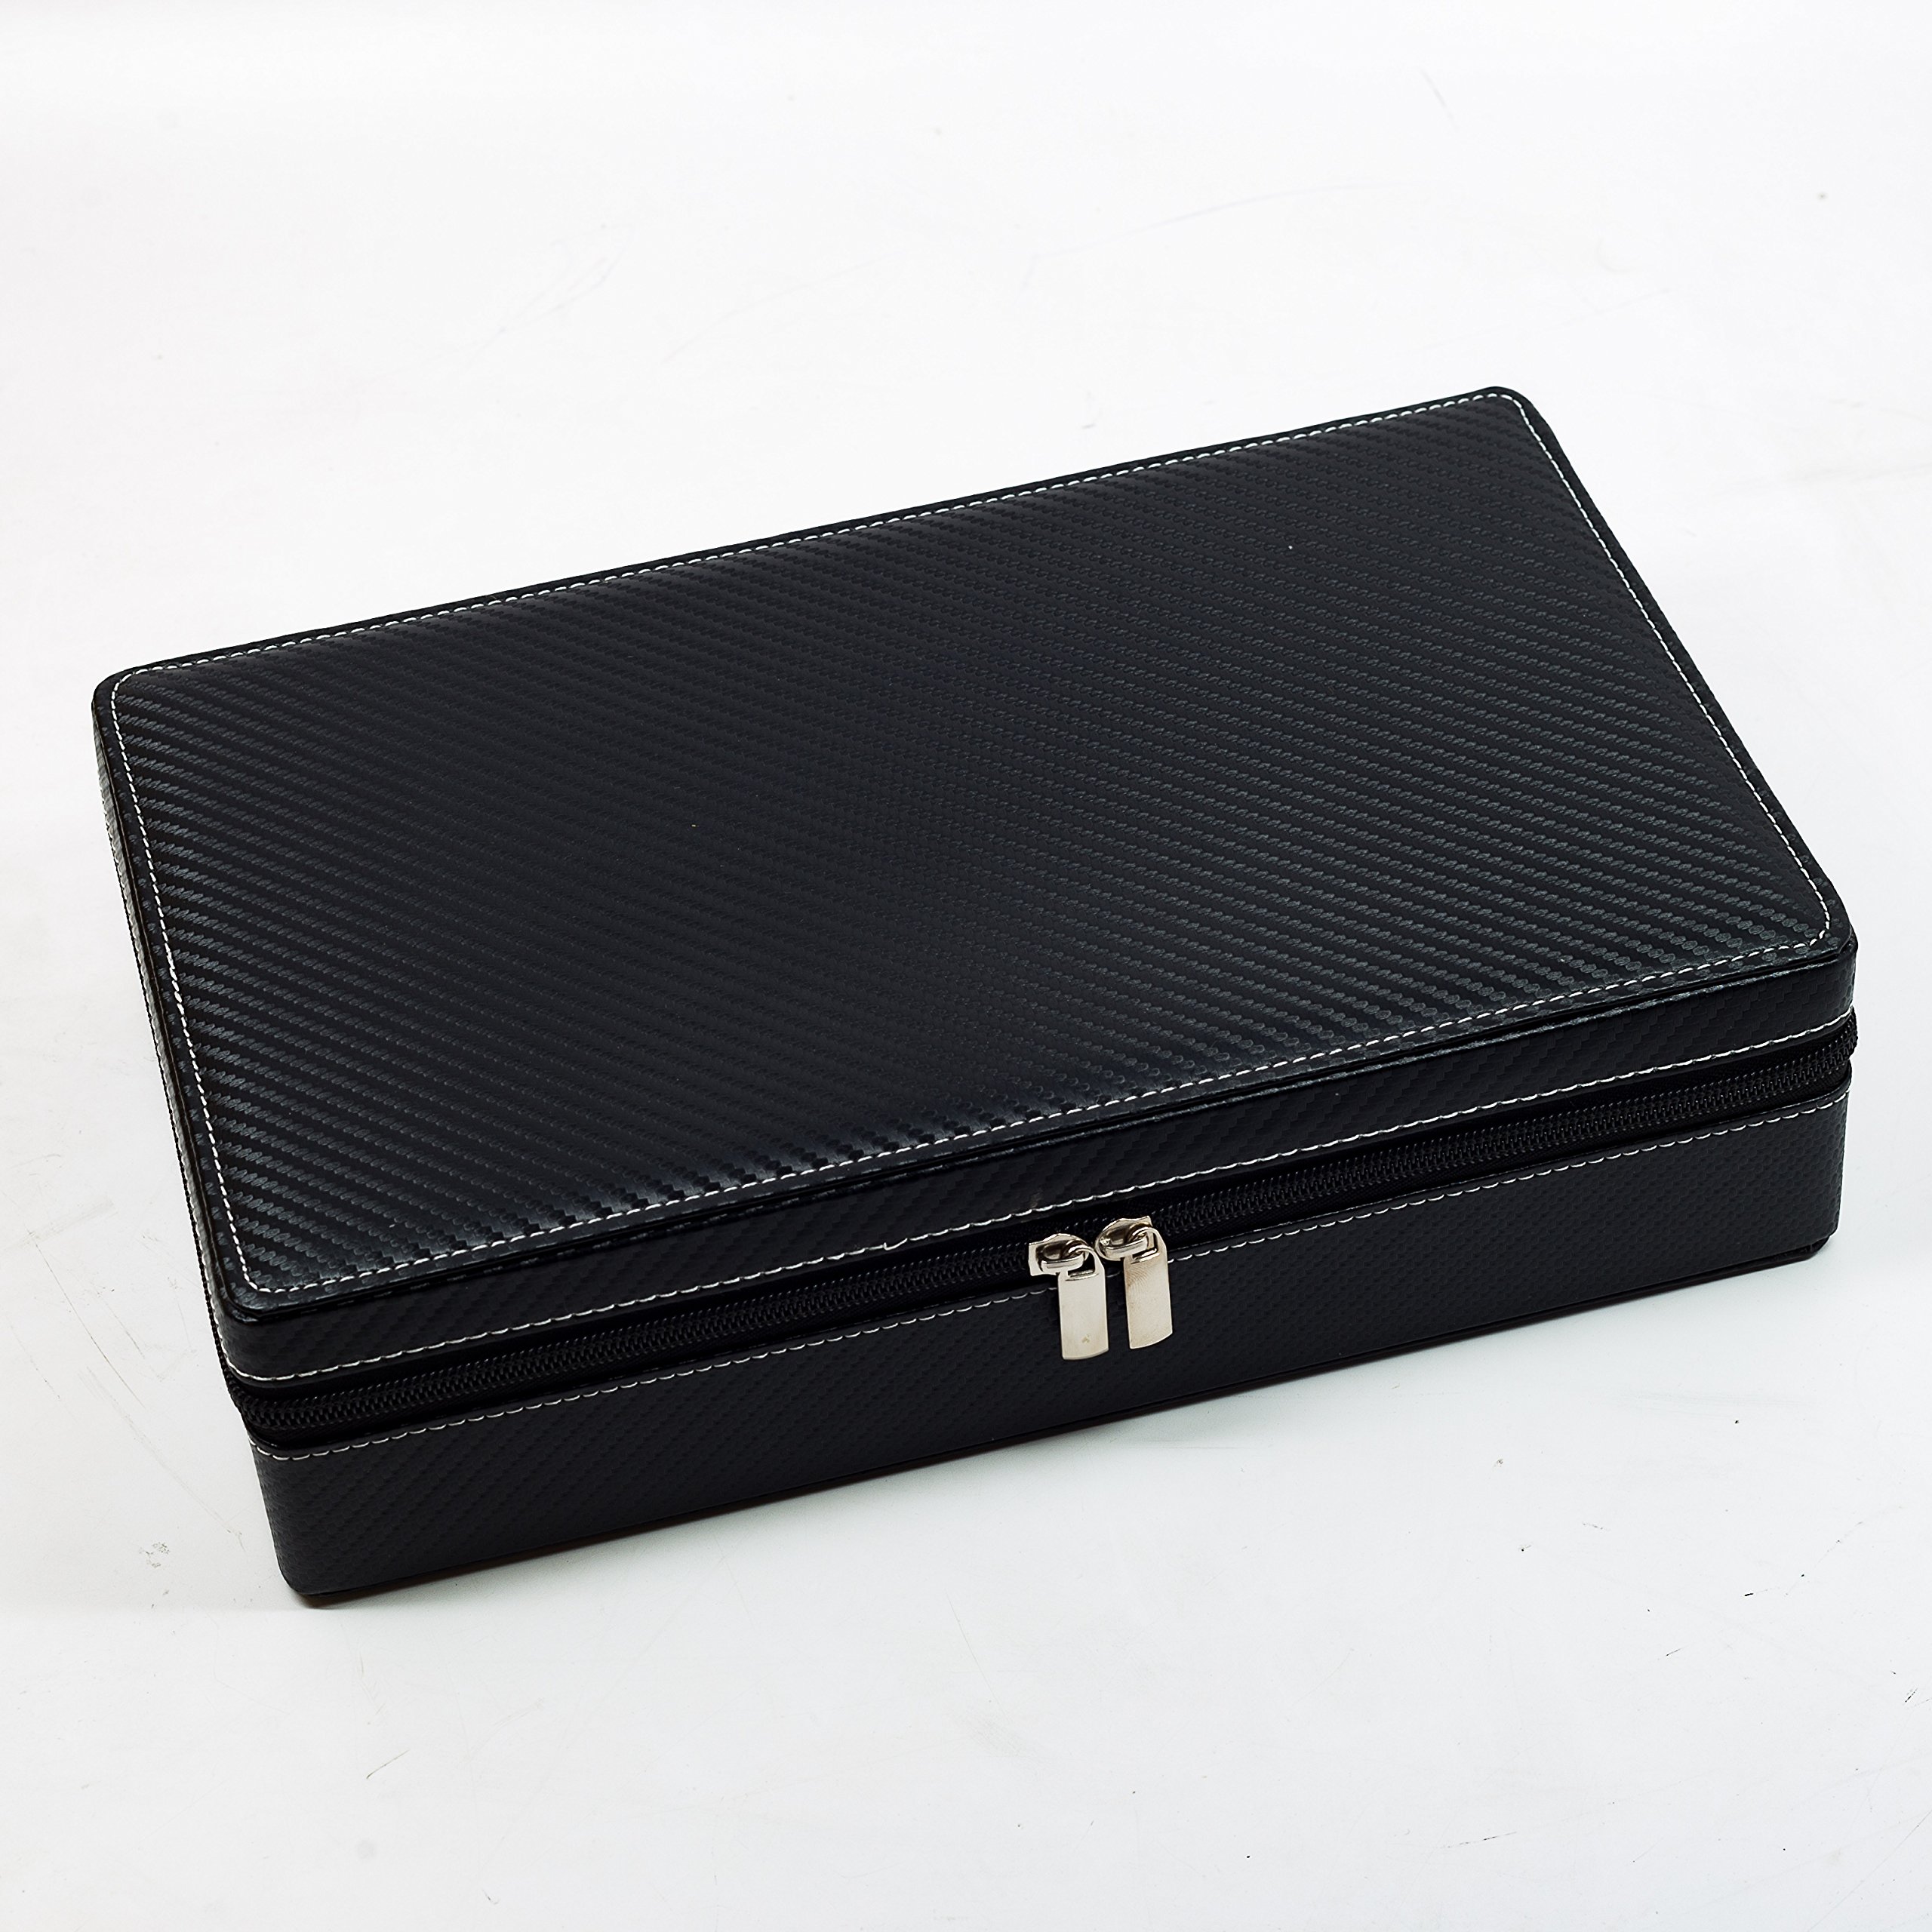 TimelyBuys 10 Watch Briefcase Black Carbon Fiber Zippered Travel Storage Case 50MM Father's Day